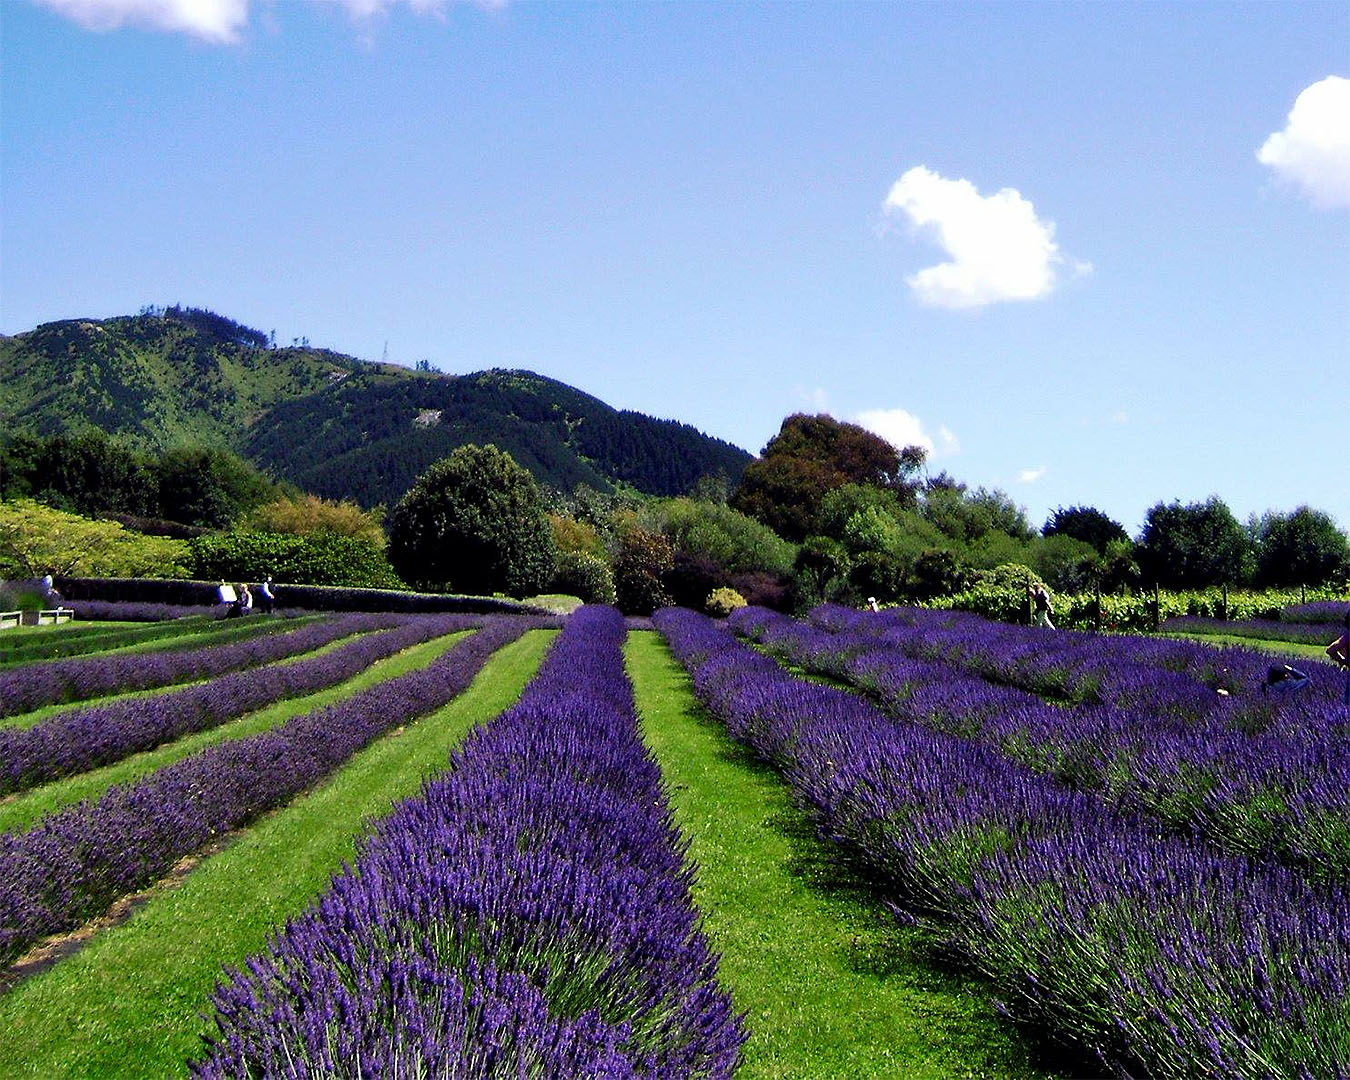 Rows upon rows of vibrant, purple lavender bushes.